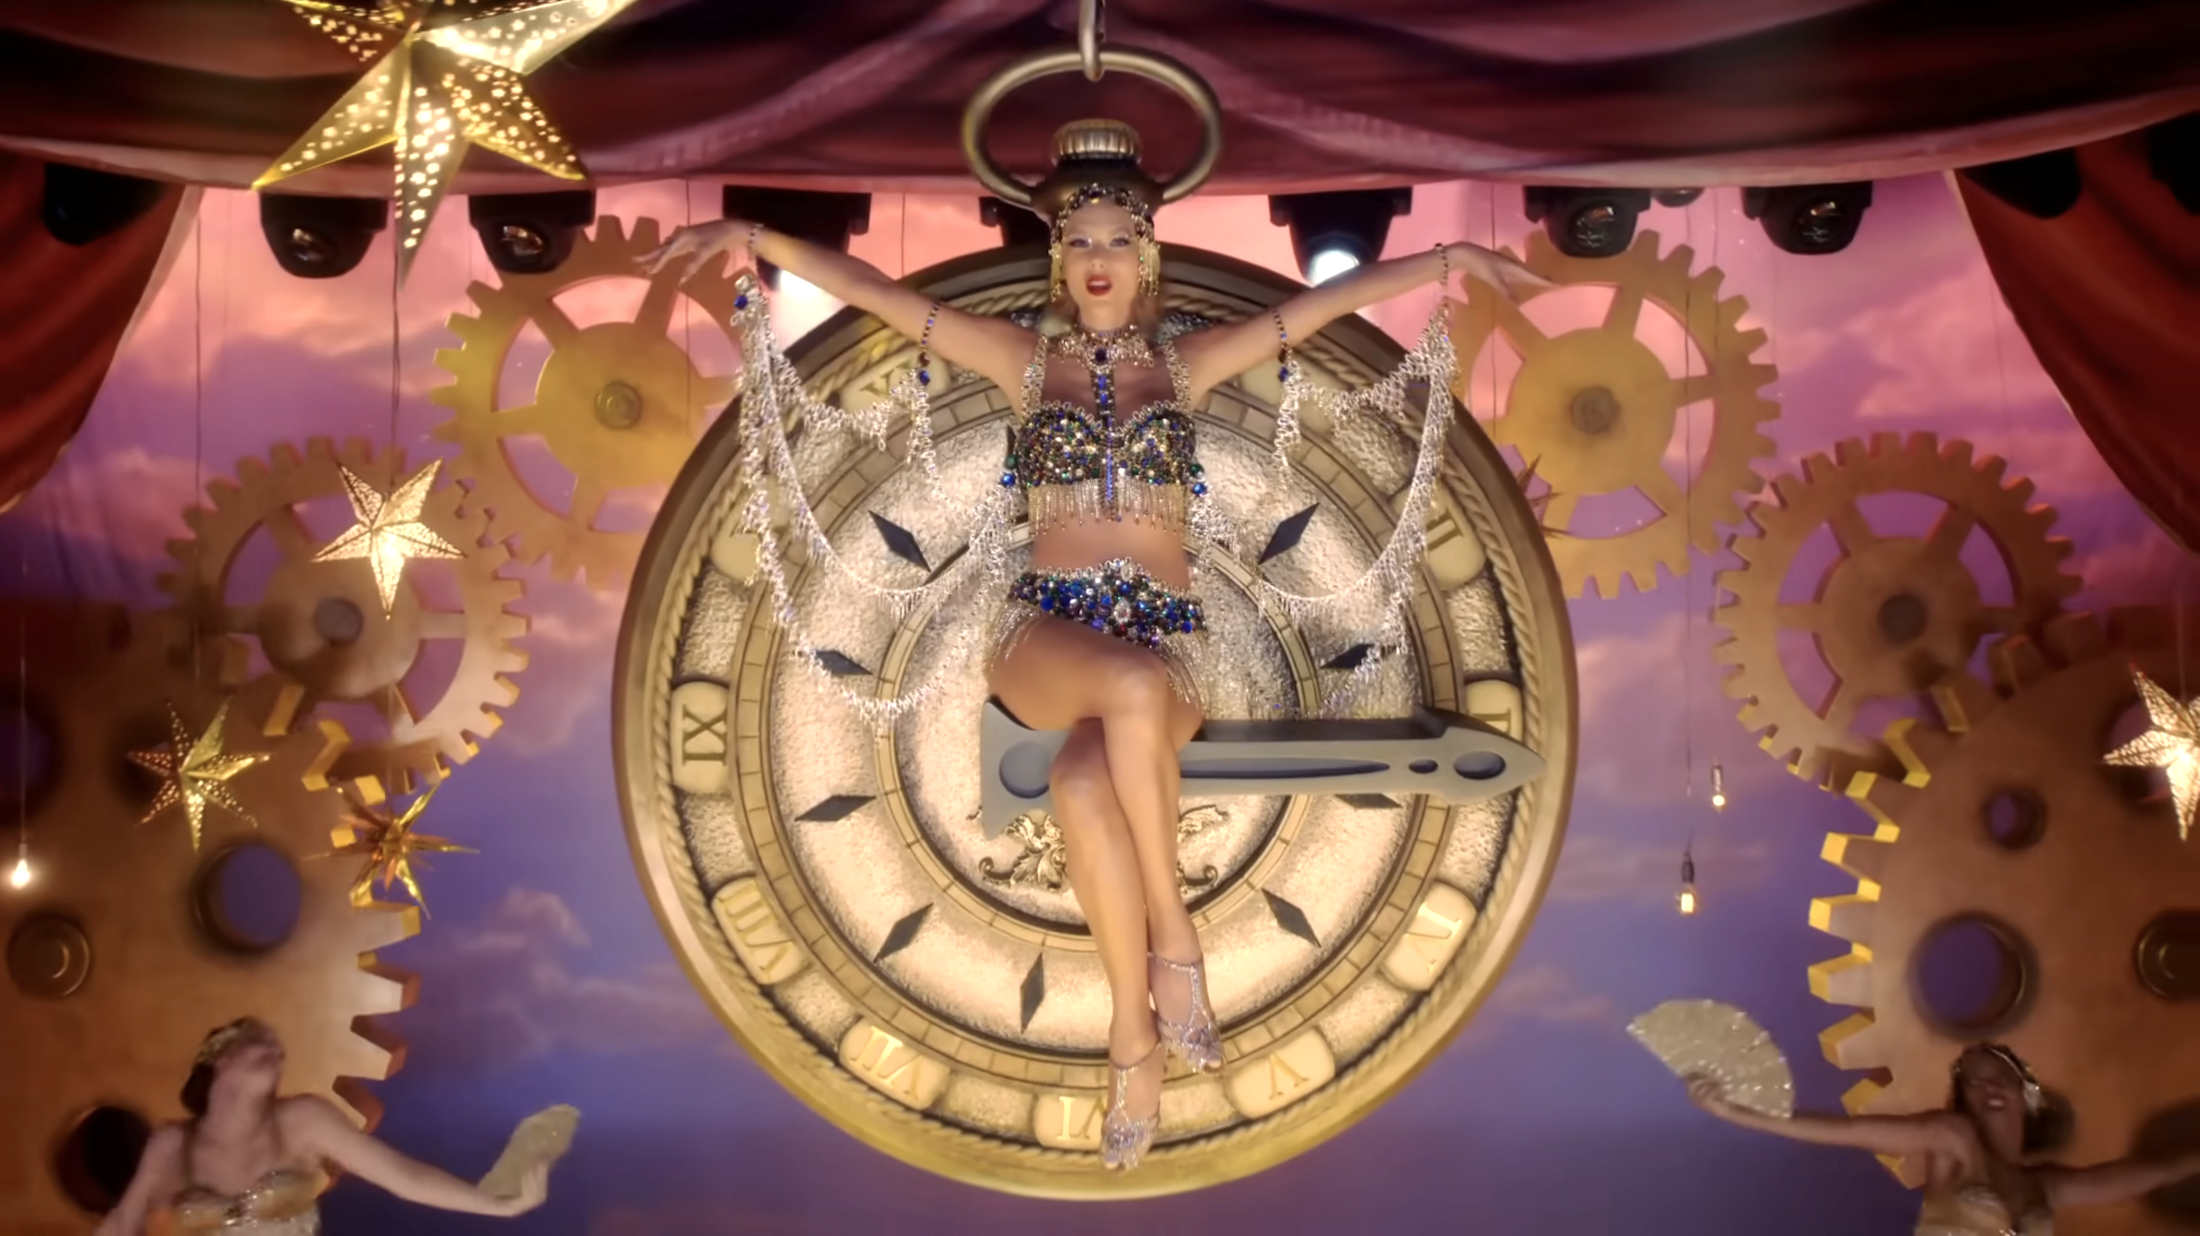 taylor swift suspended in air sitting on clock